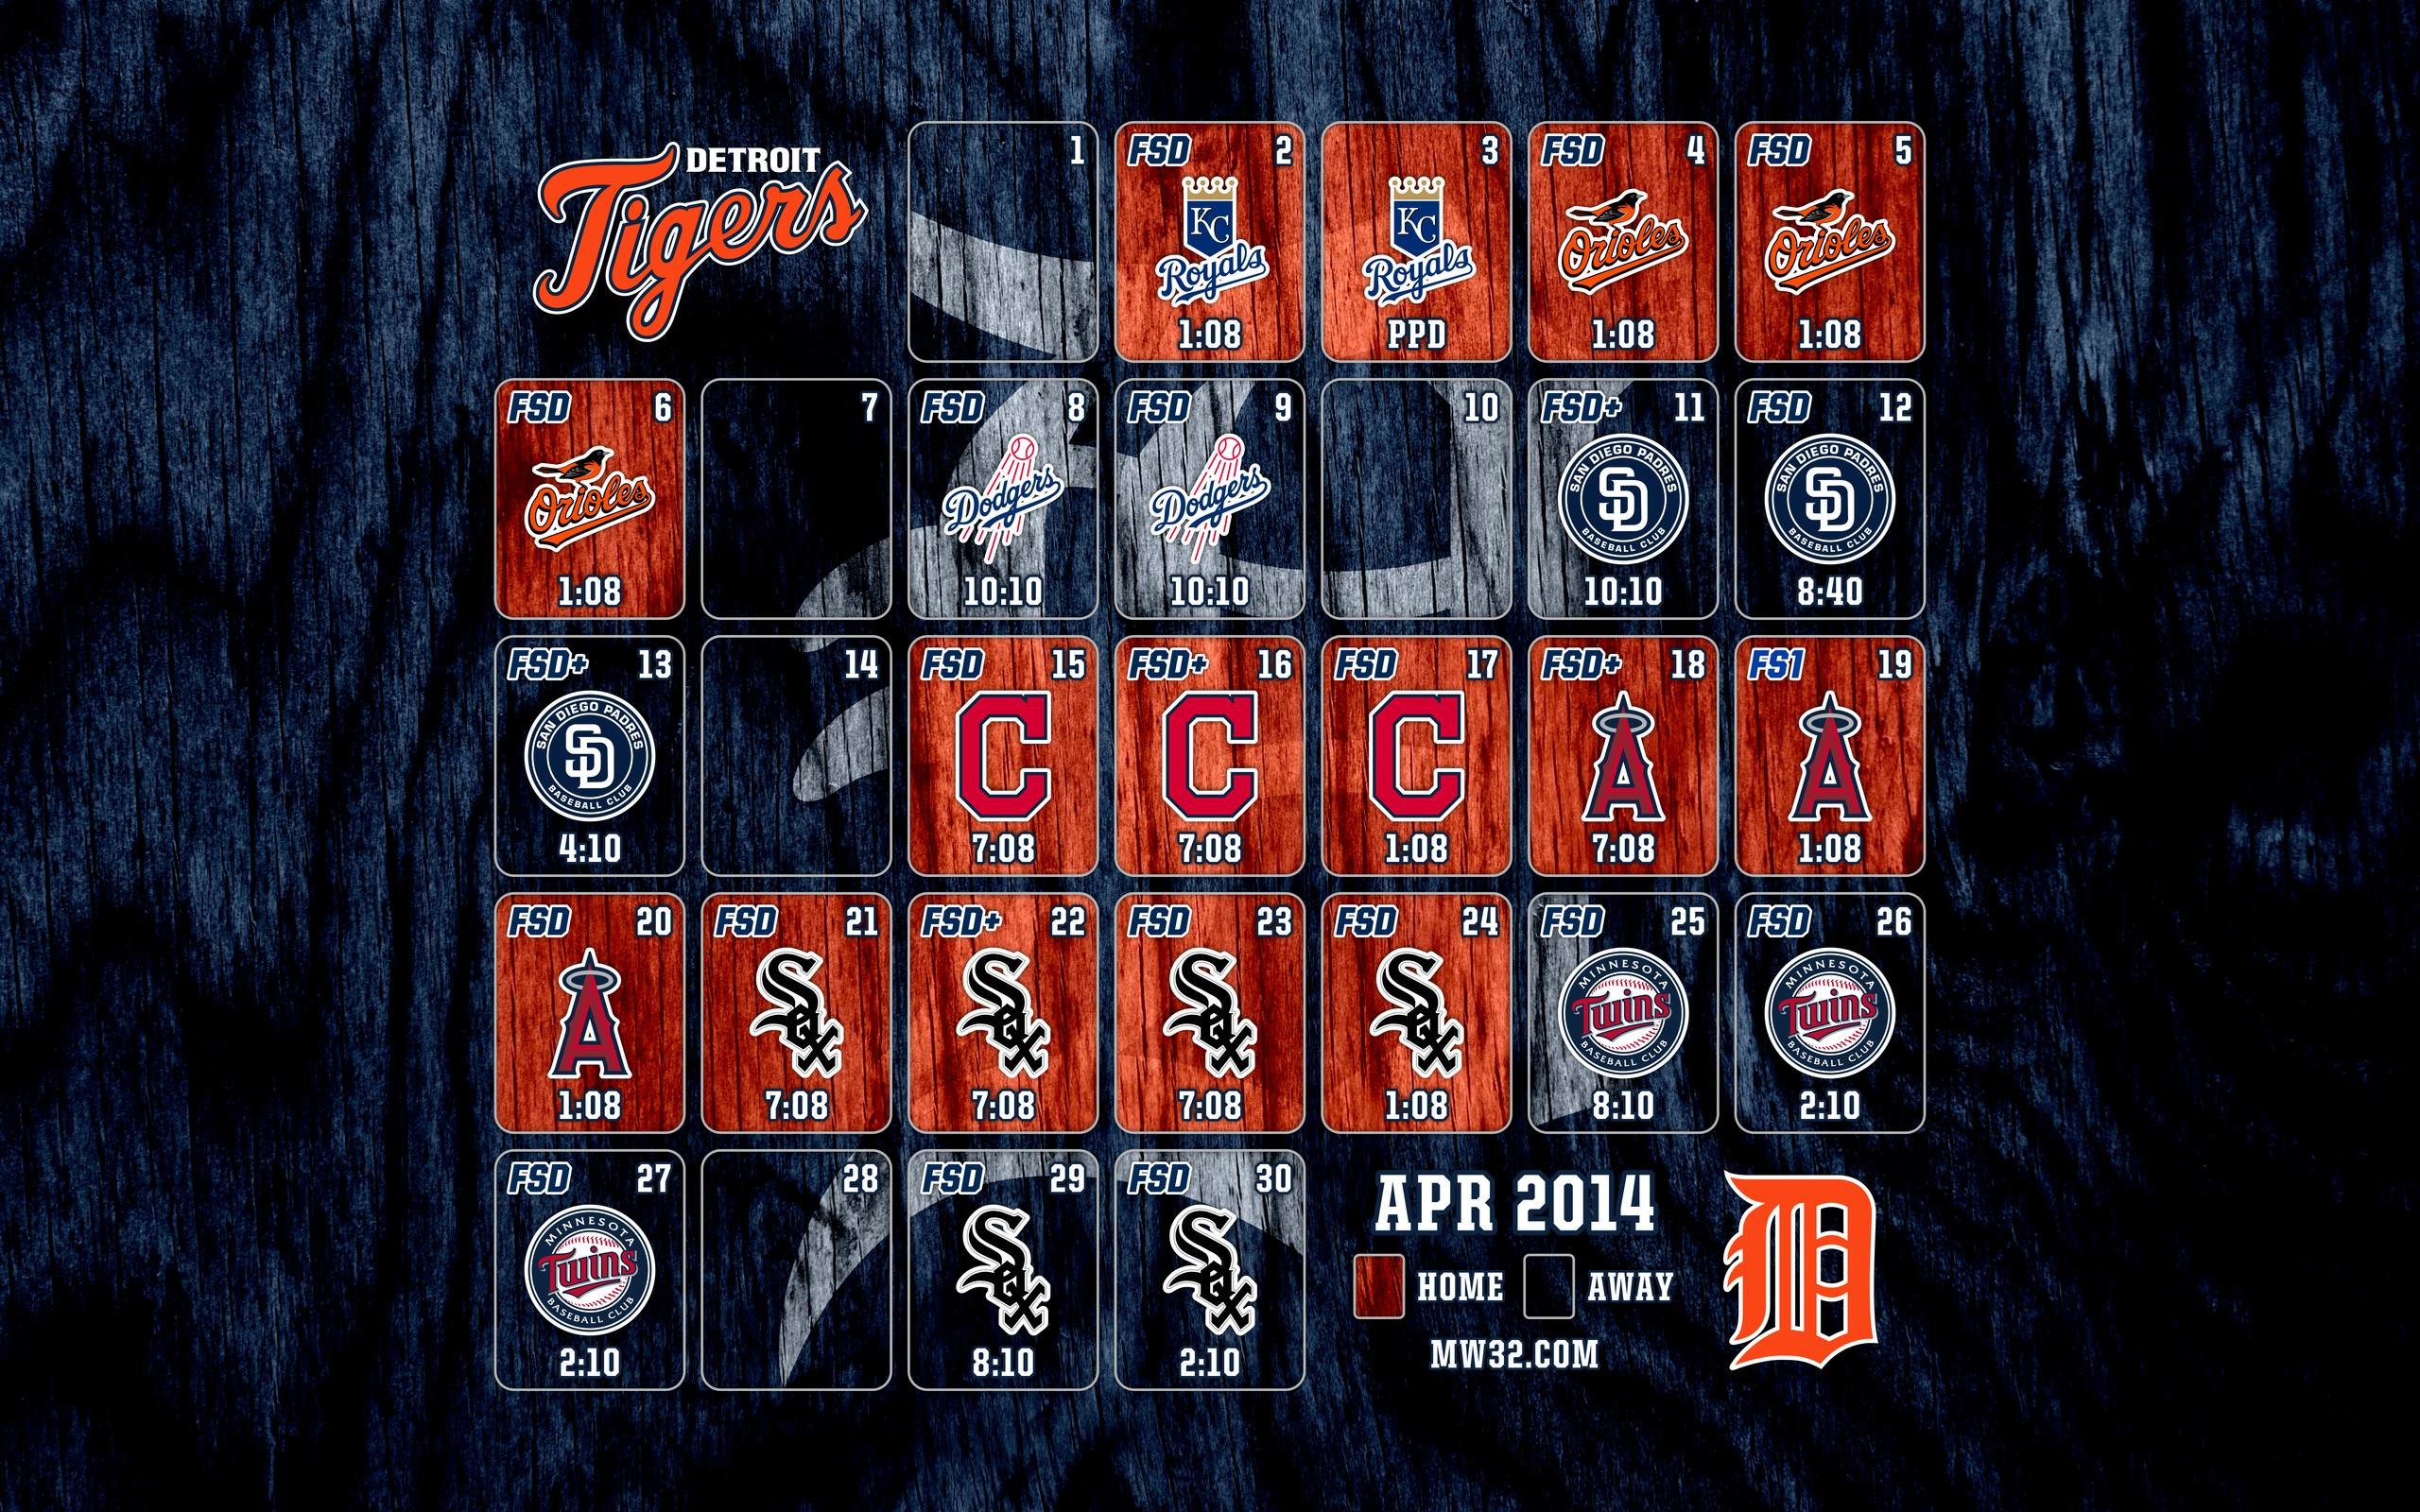 2560x1600 MonkeyWrench32 Â» April 2014 Schedule Wallpapers